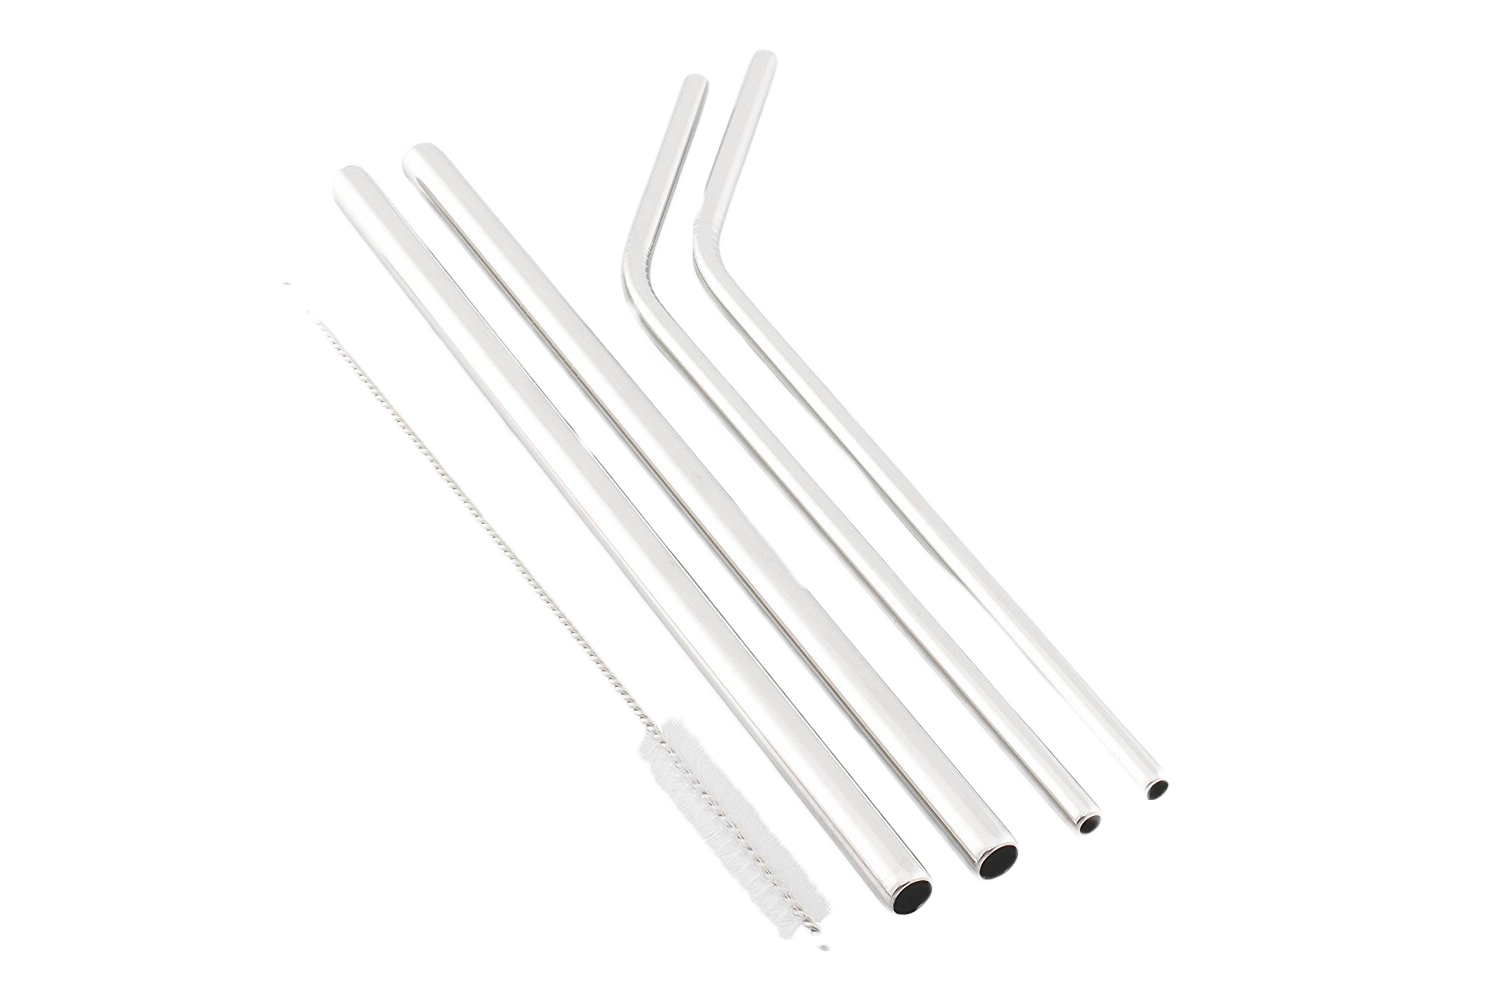 ExcelSteel 10 Pc Reusable Powder Coated Stainless Steel Straws W